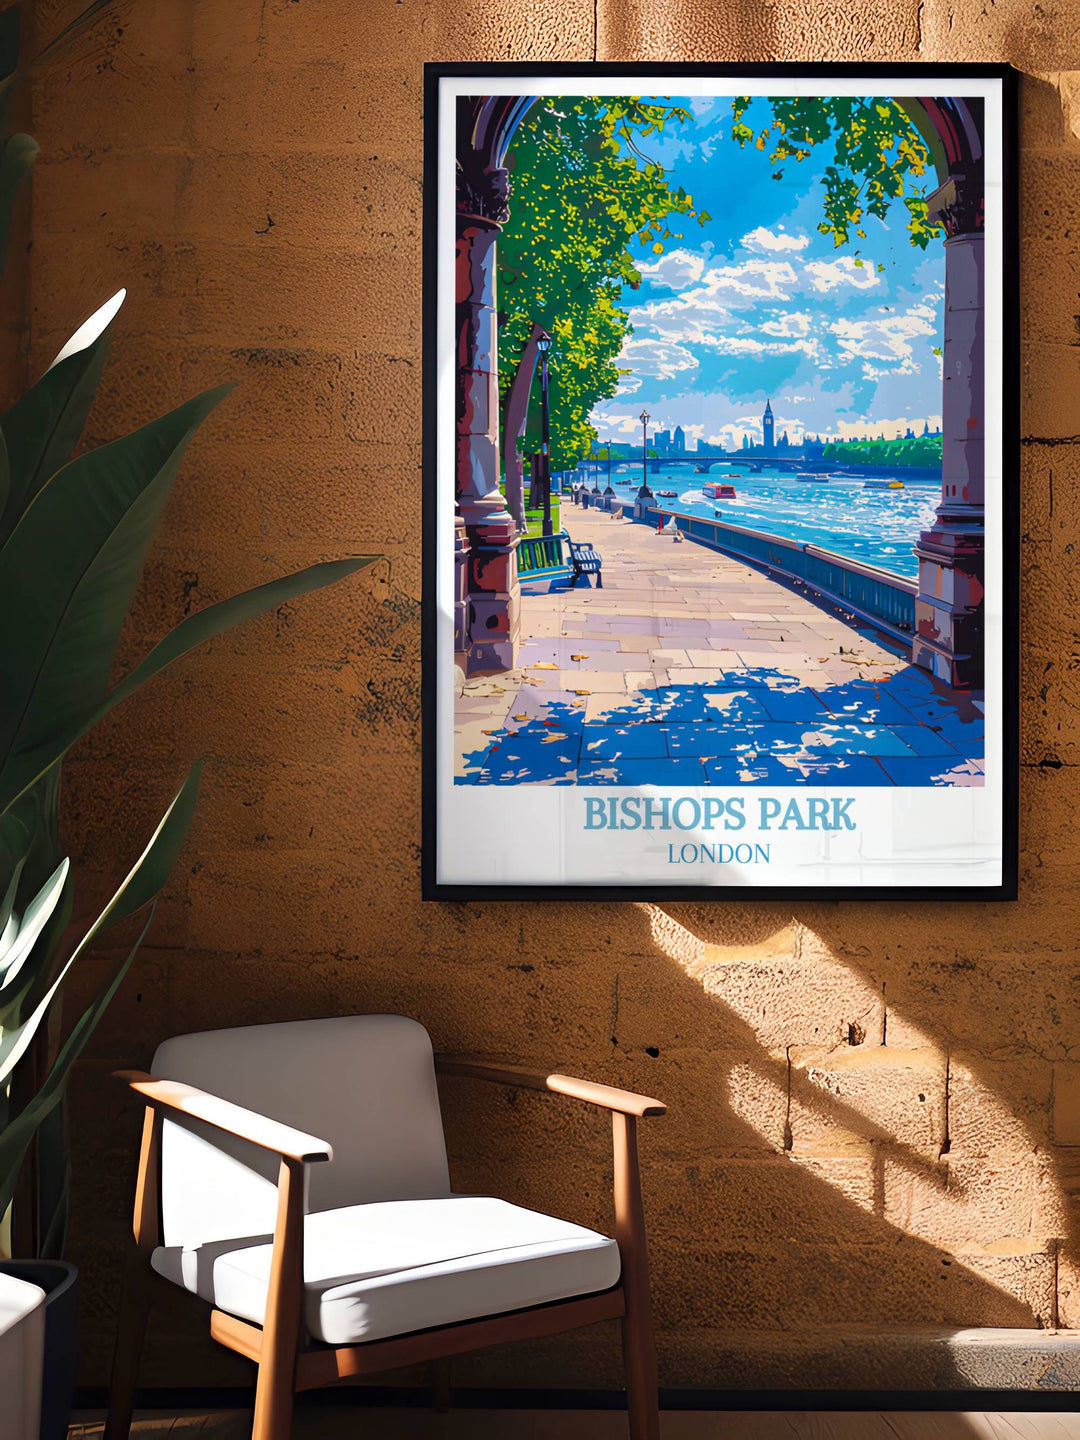 London Thames River Walk illustrated in a print with rich colors and detailed views of the citys bustling river life.